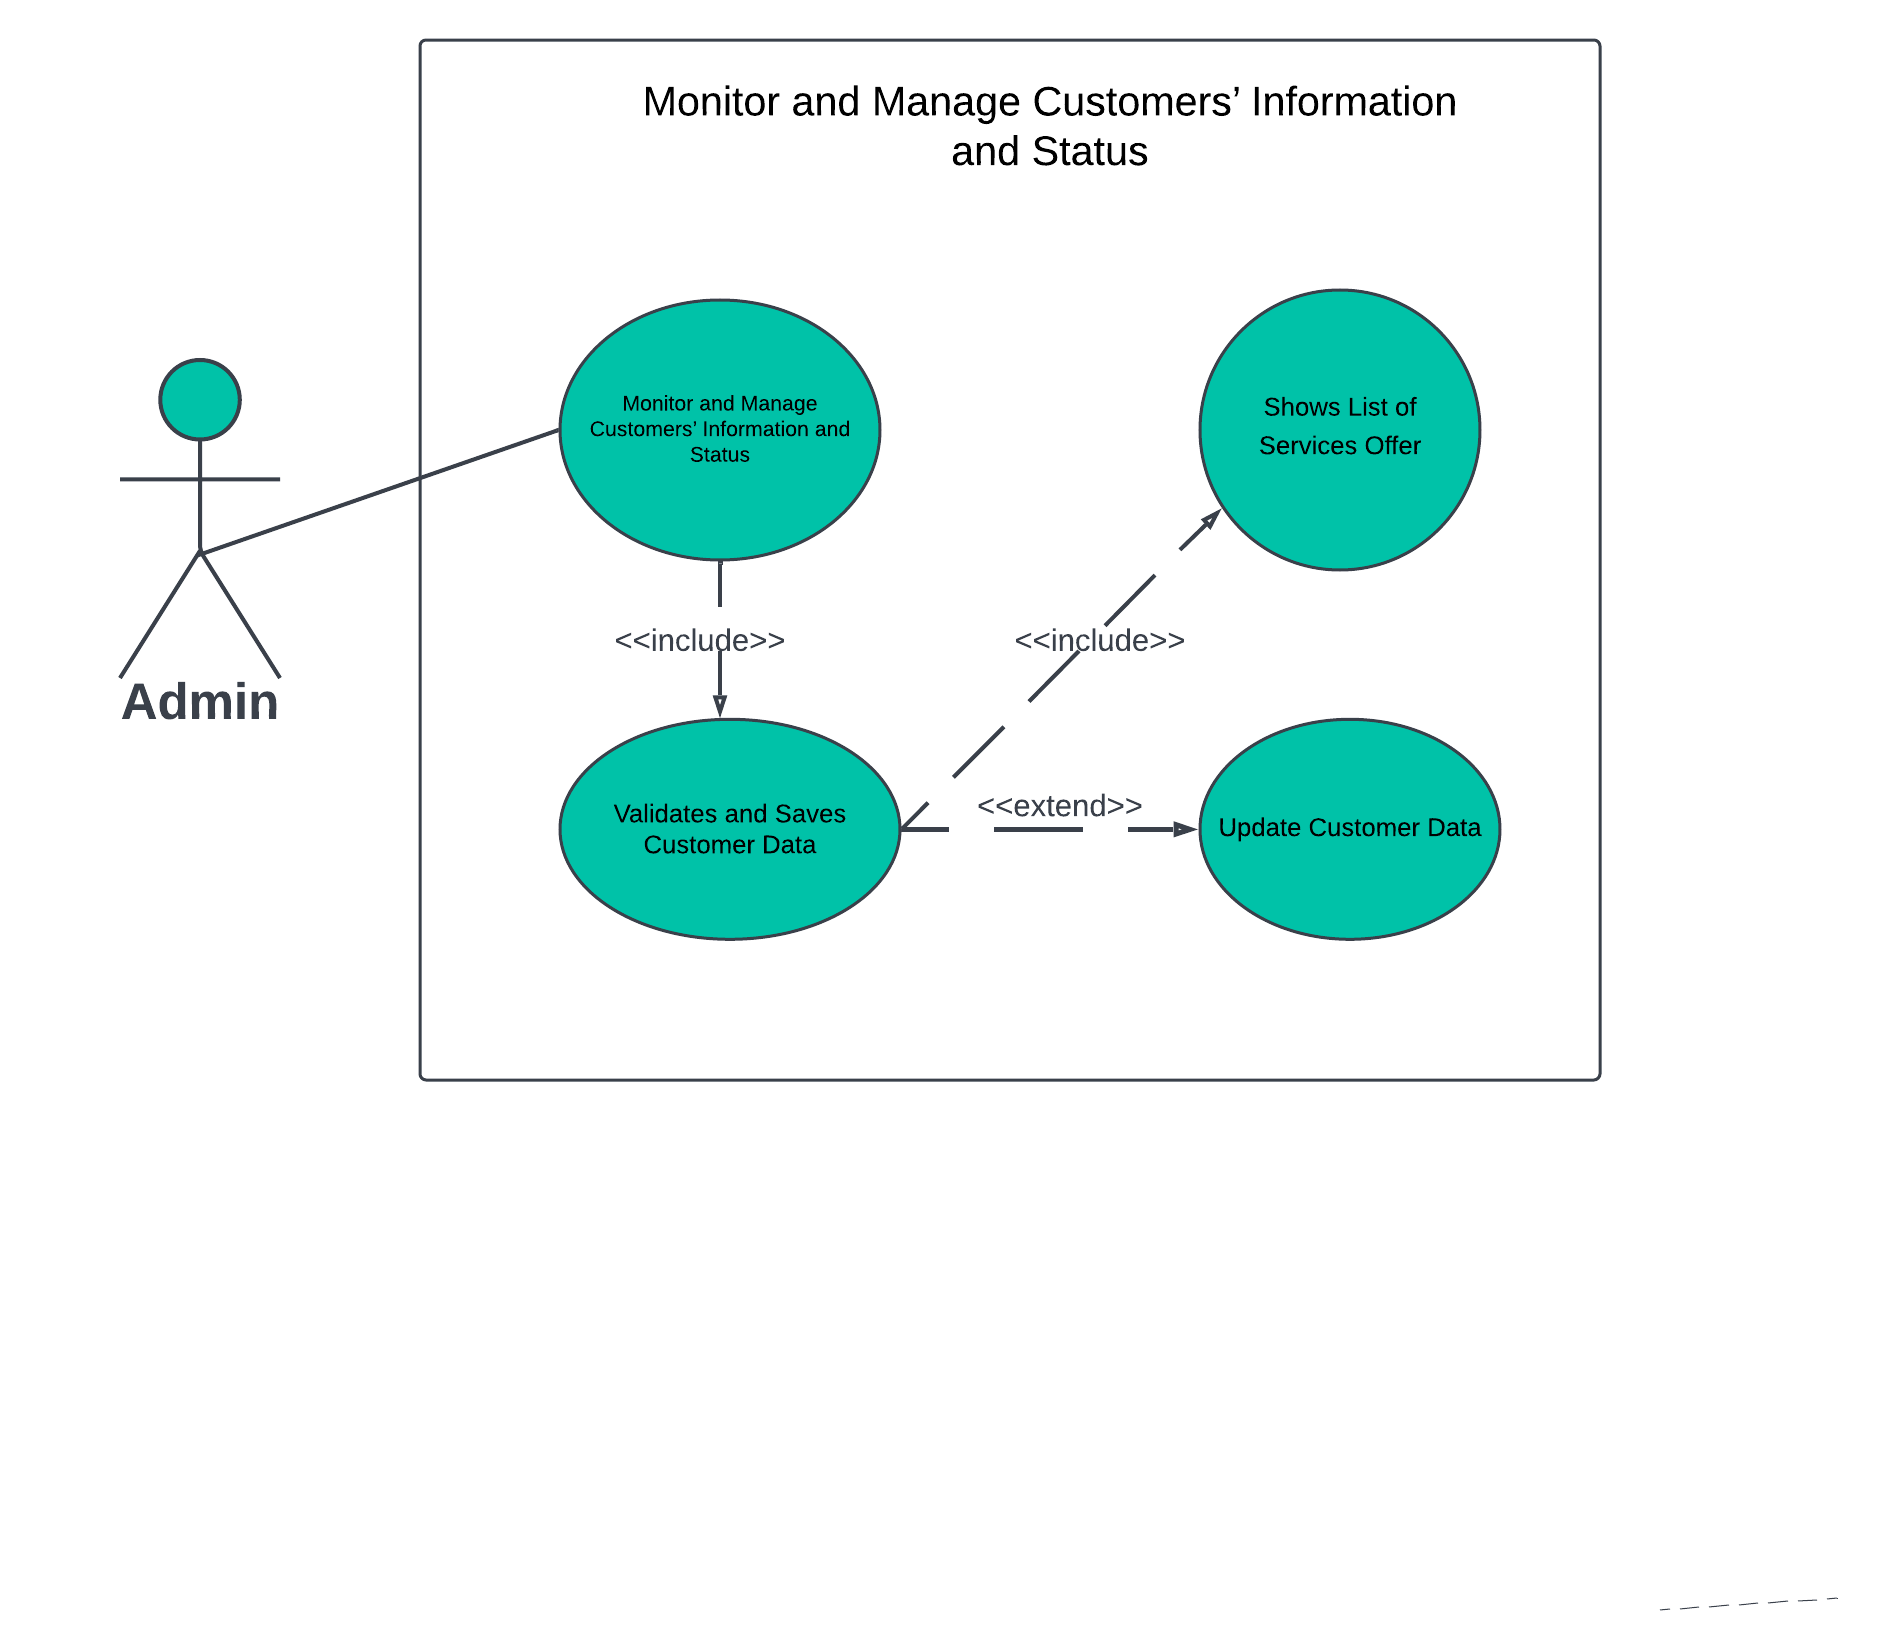 MANAGE AND MONITOR CUSTOMER INFORMATION AND STATUS USE CASE DIAGRAM